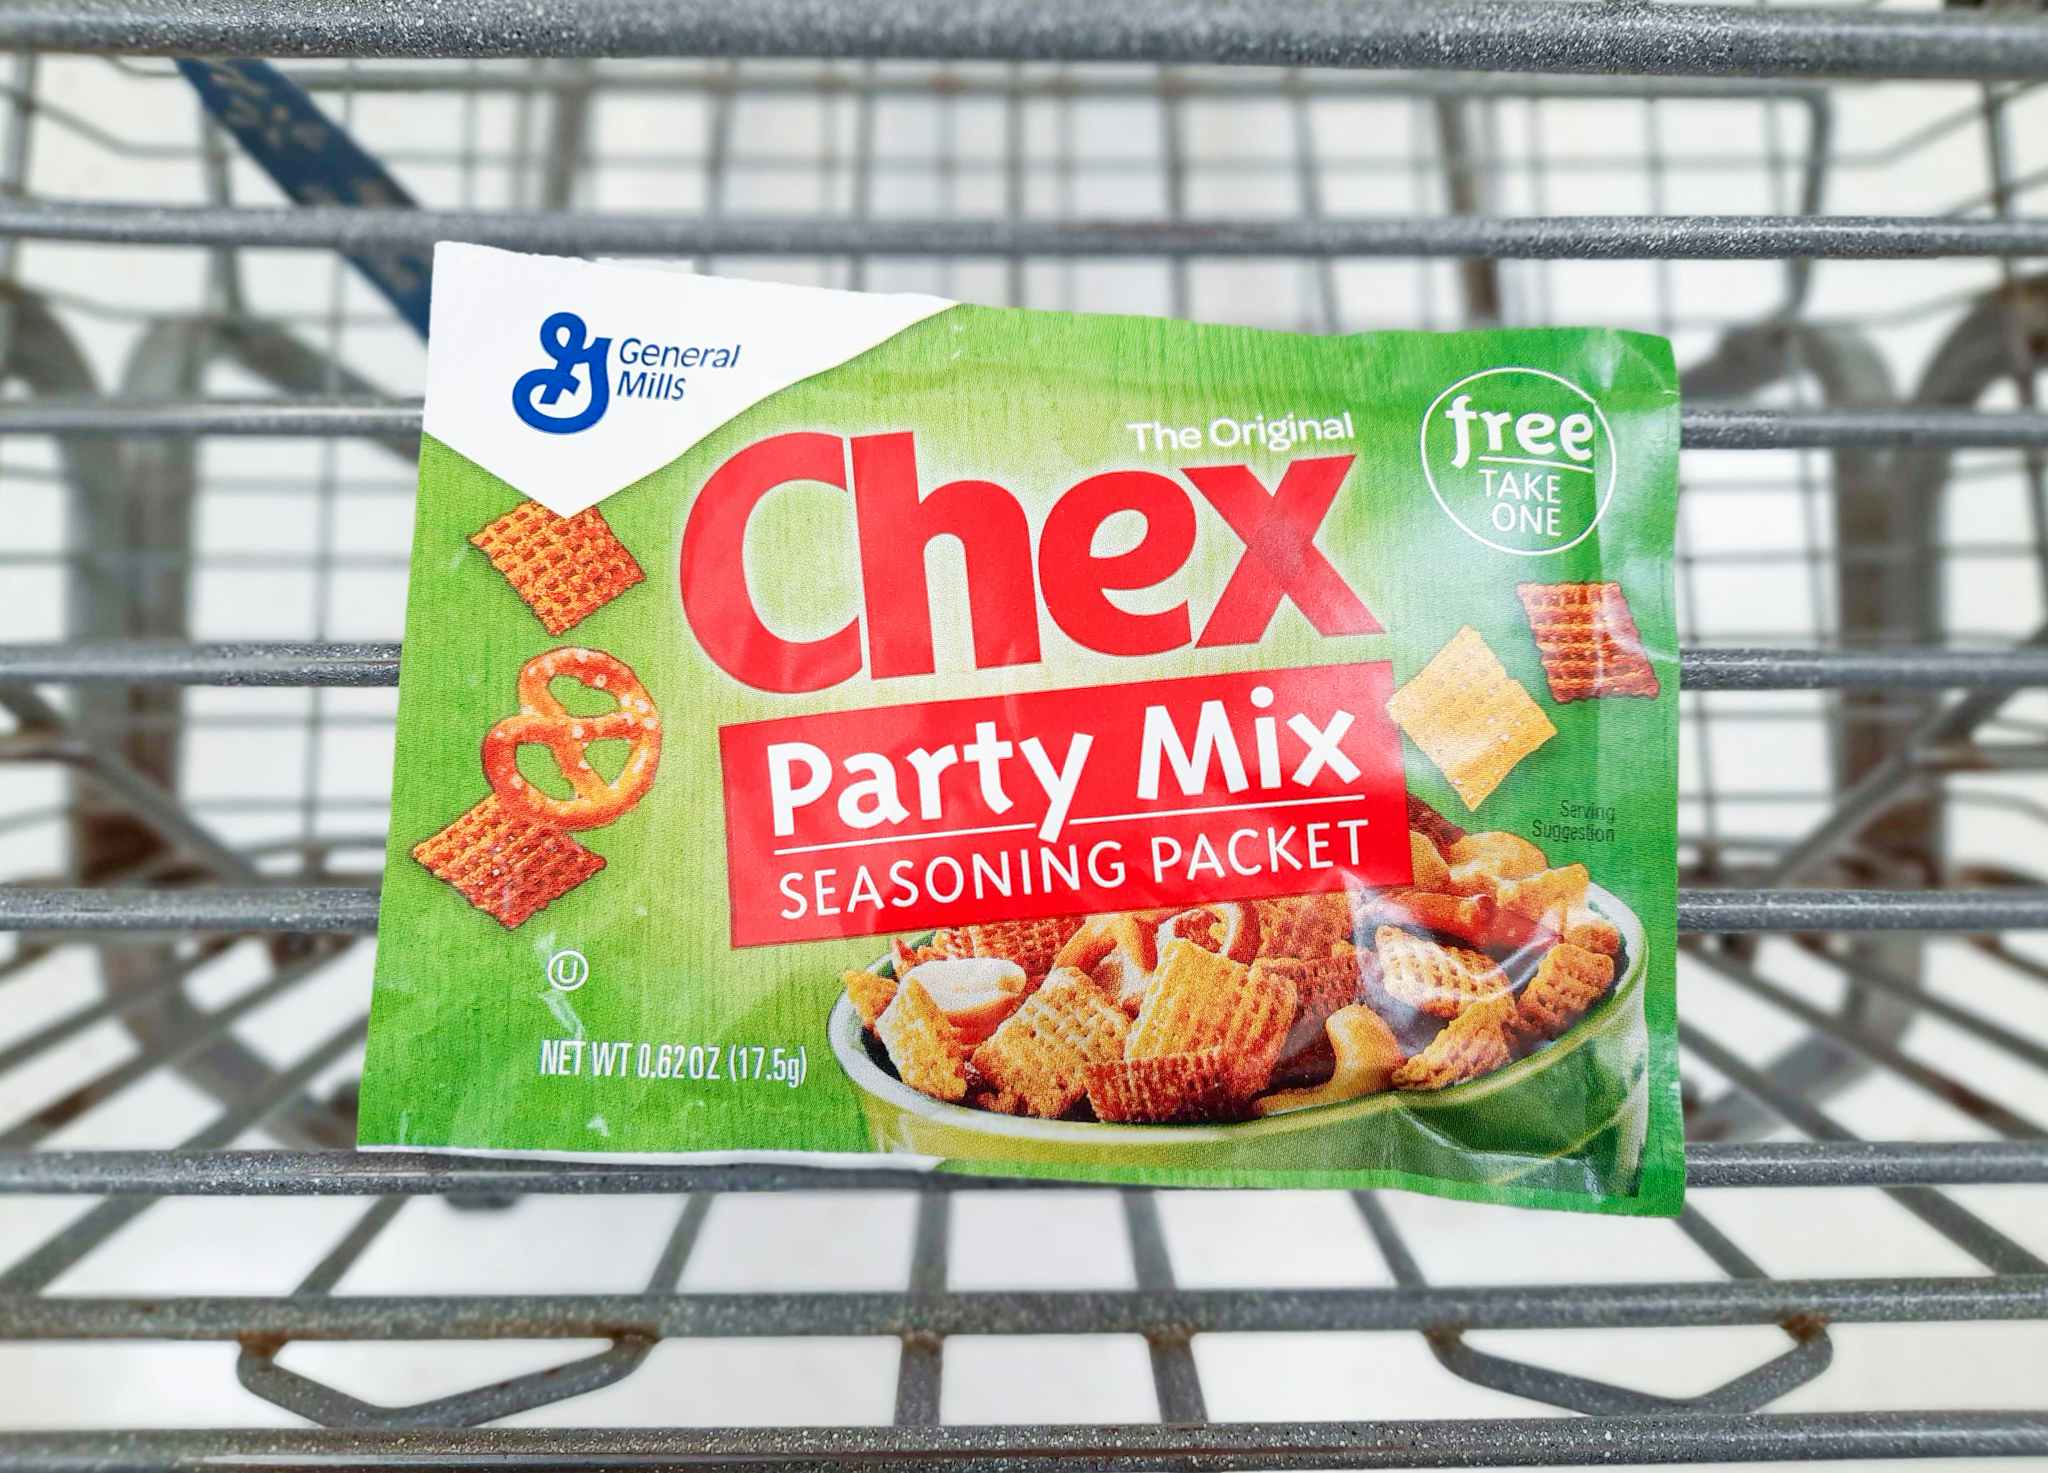 Chex Party Mix Seasoning Packet in Walmart shopping cart